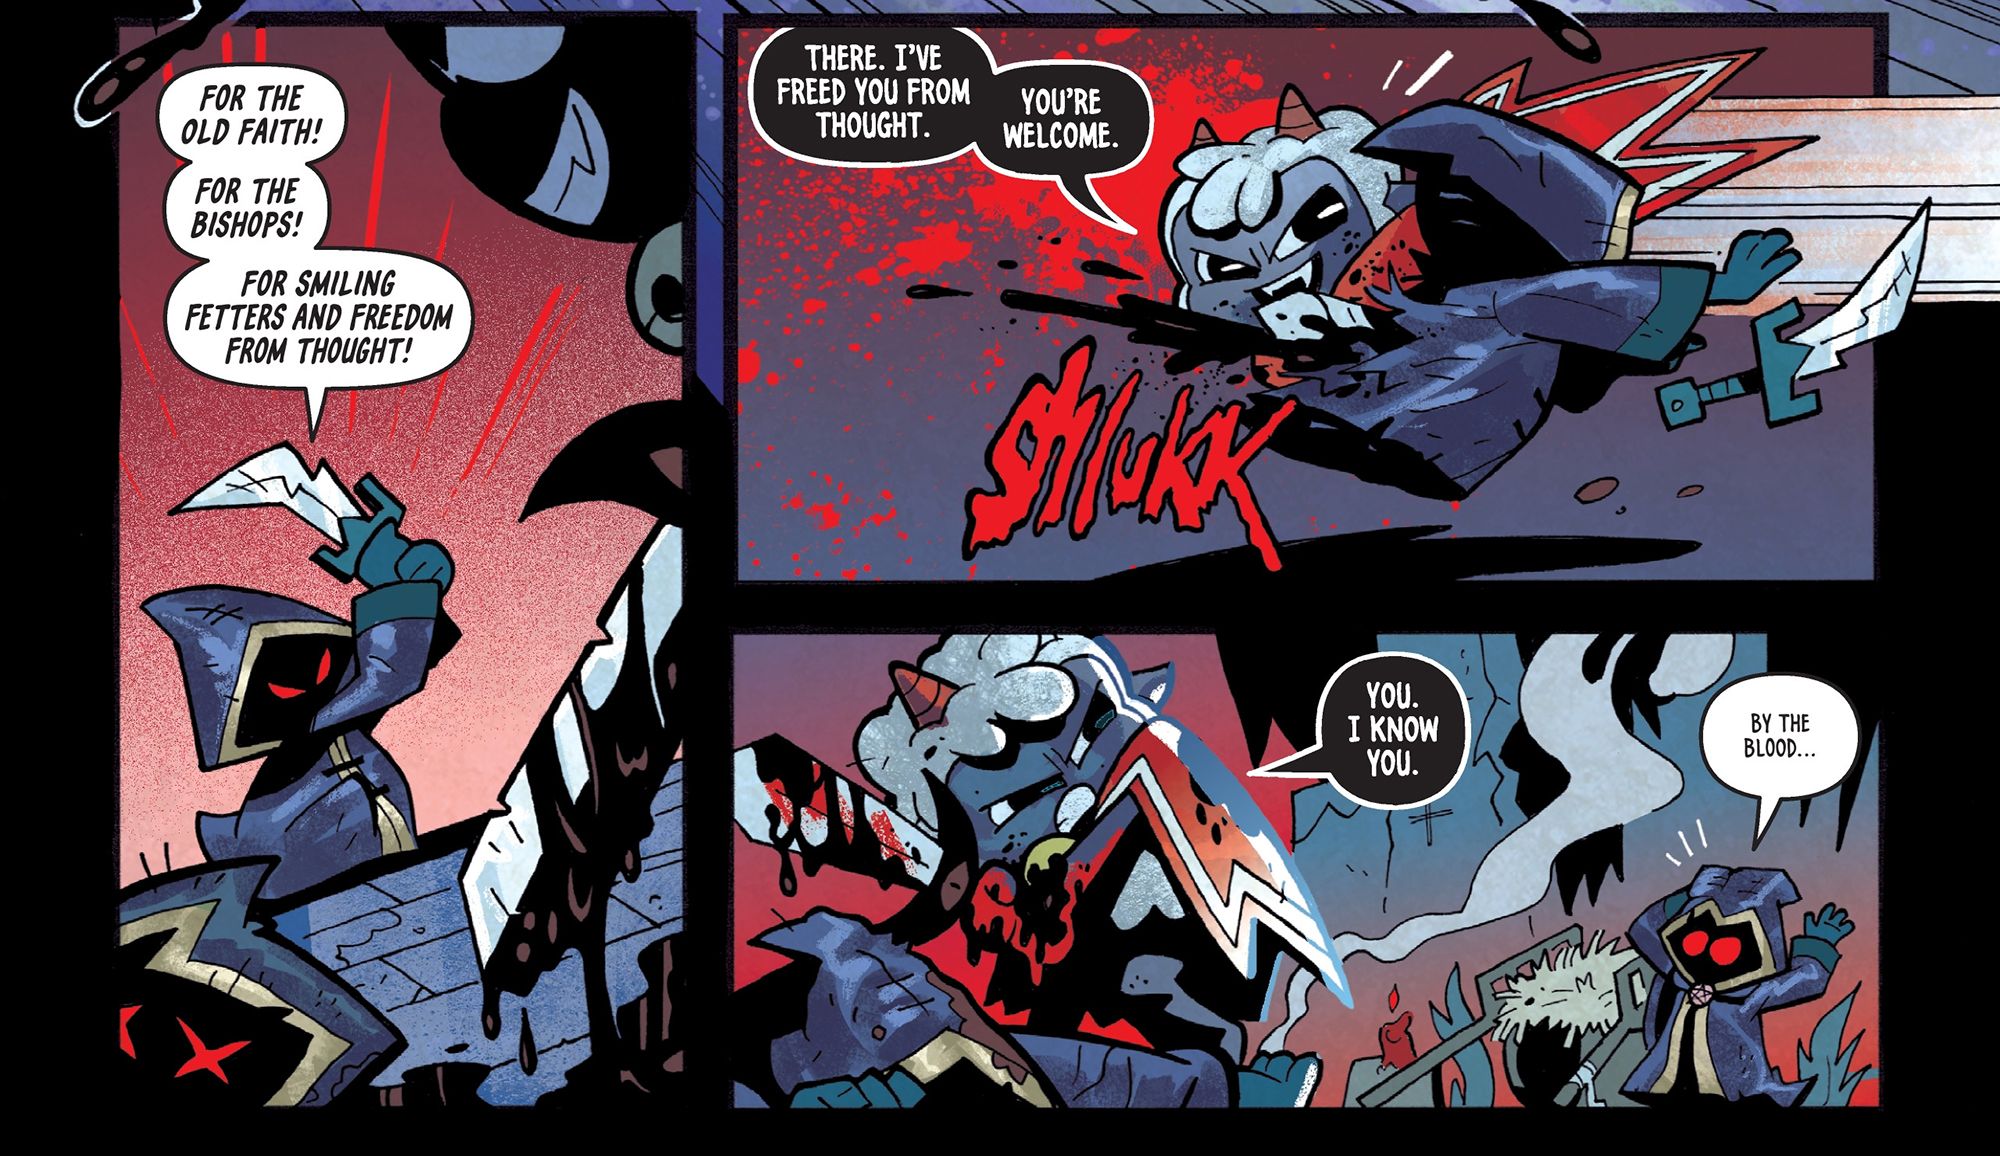 Panels from Cult of the Lamb #1 - the Lamb kills the heretics violently, without remorse and with quips.